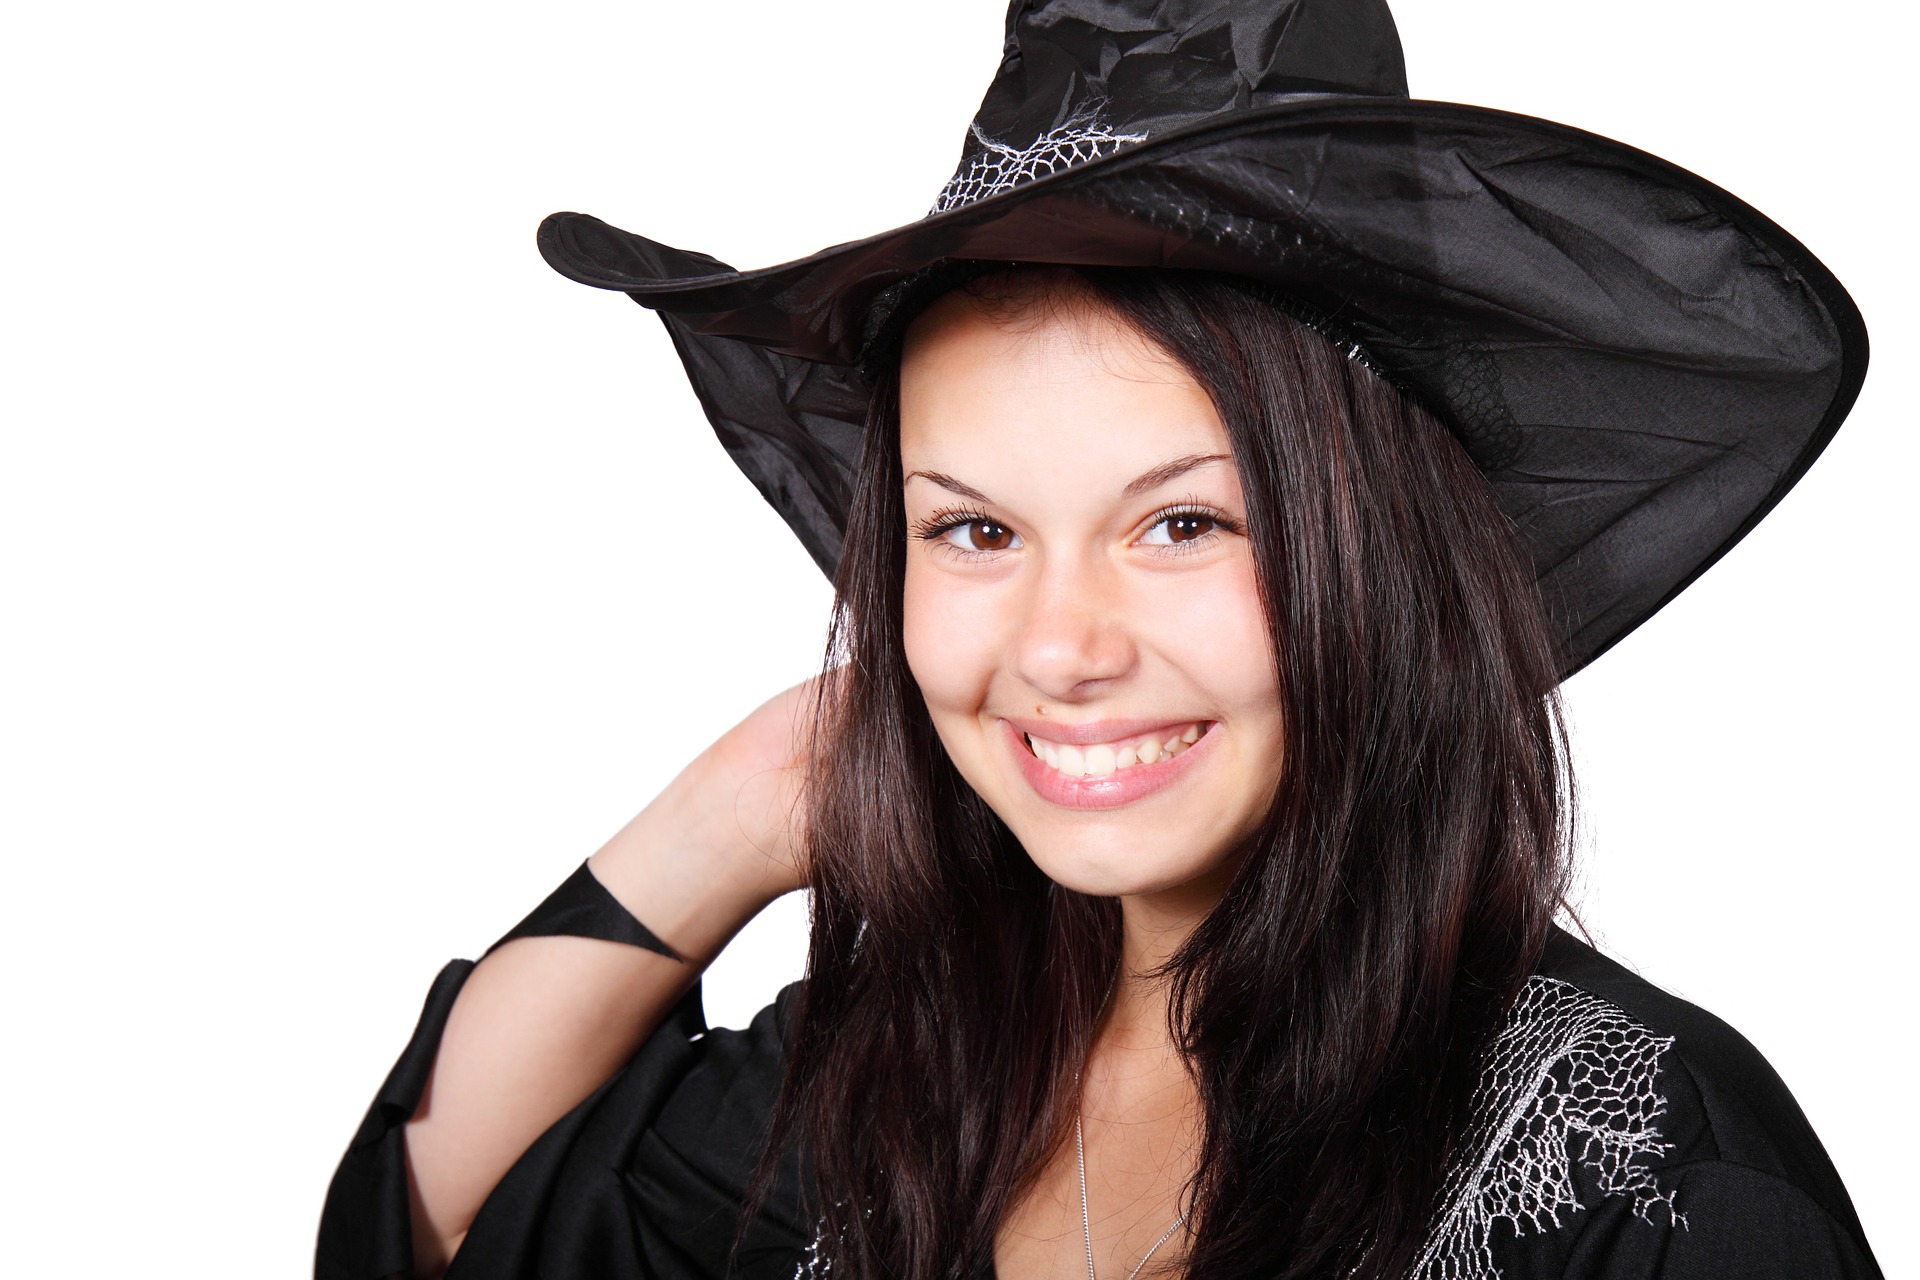 Fun Halloween Events and Activities in the Falls Church Area